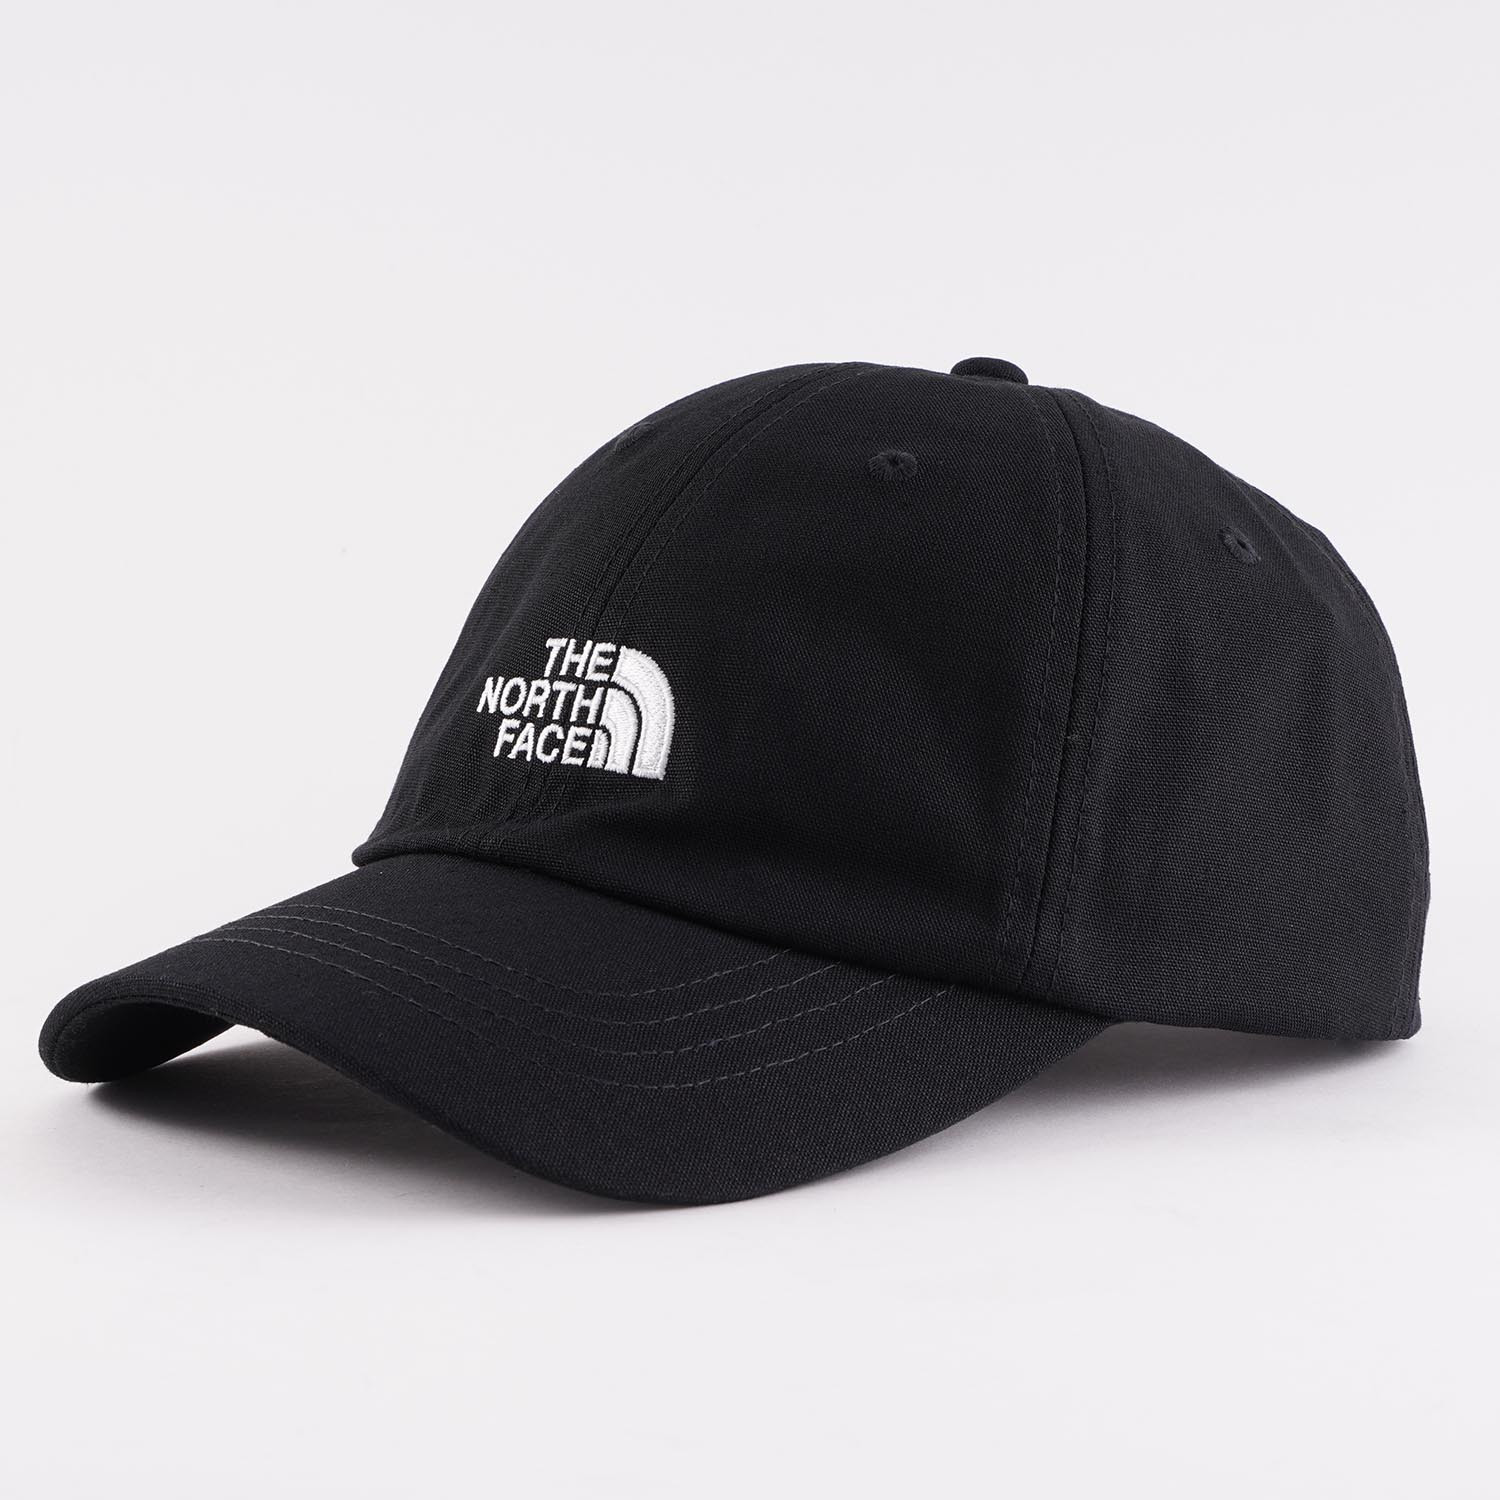 THE NORTH FACE Norm Hat (9000047264_4617)